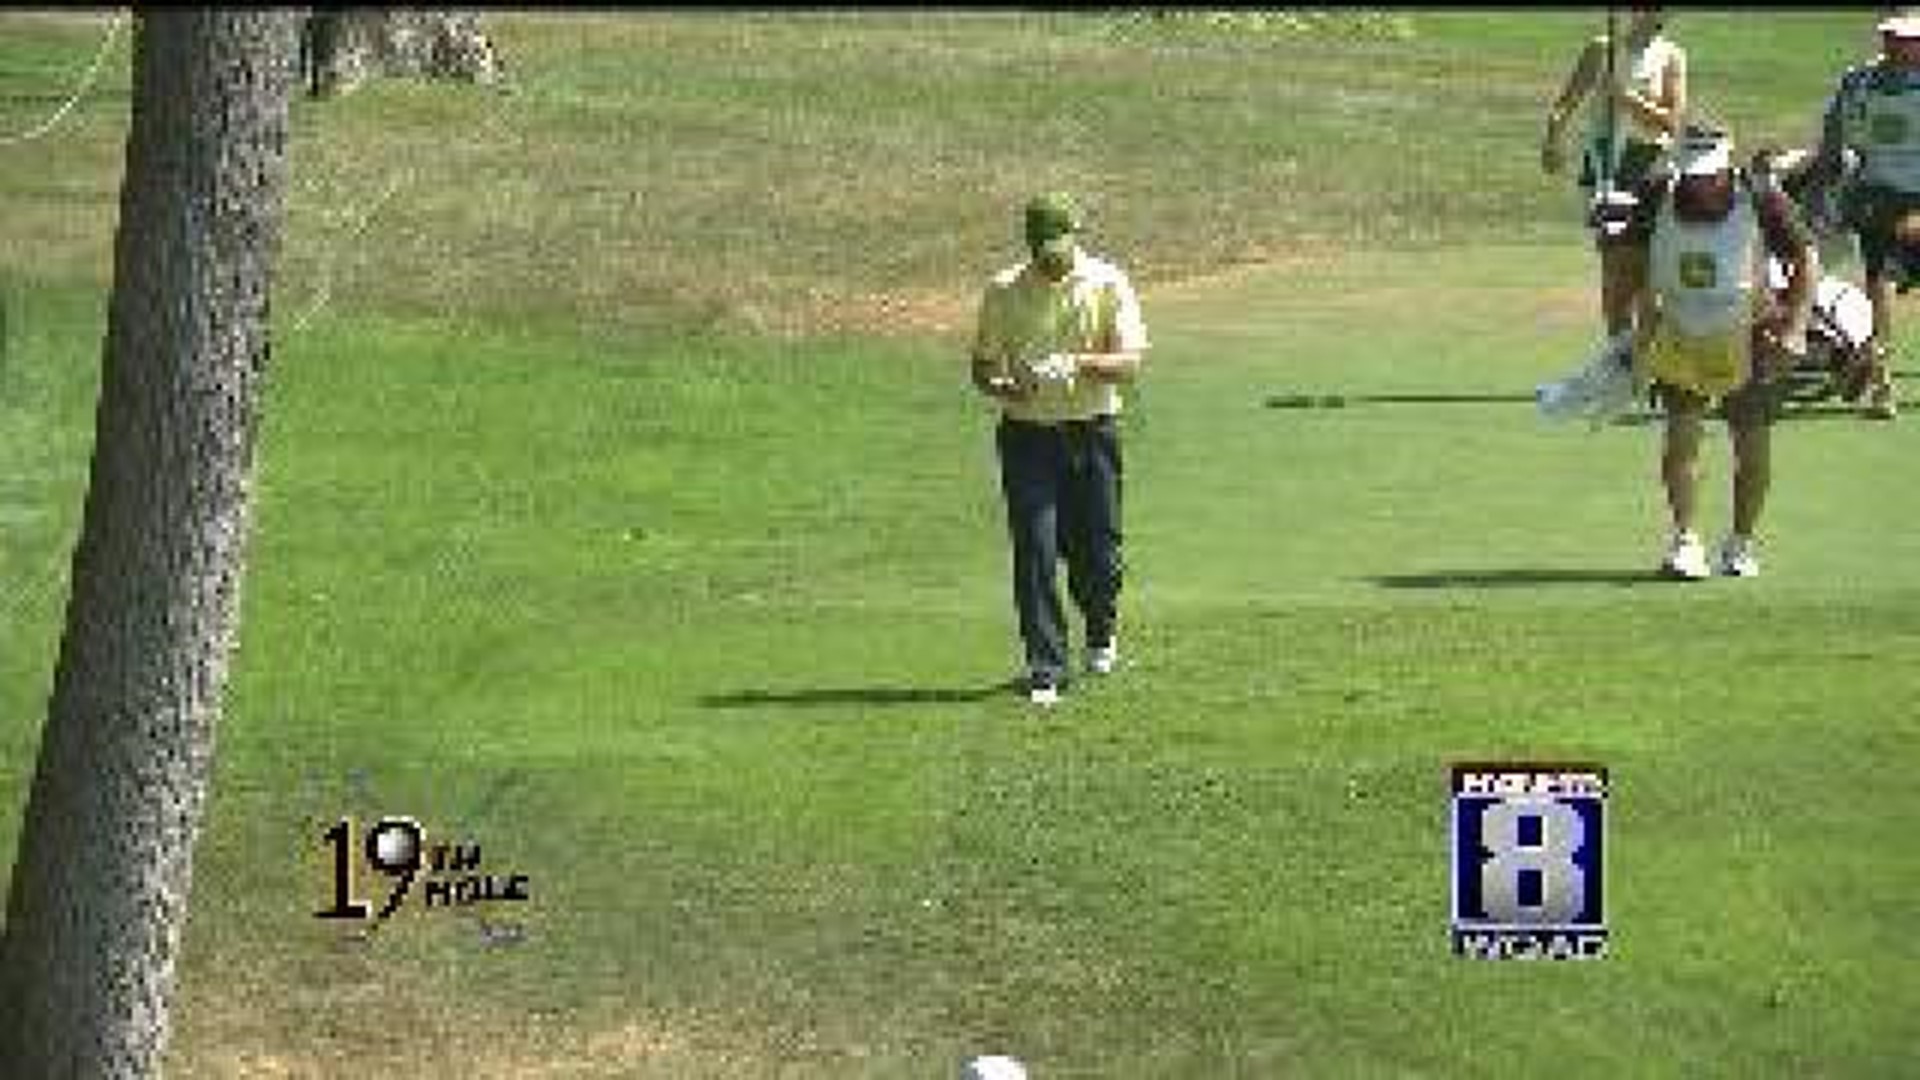 19th Hole Part 2 7-15-12